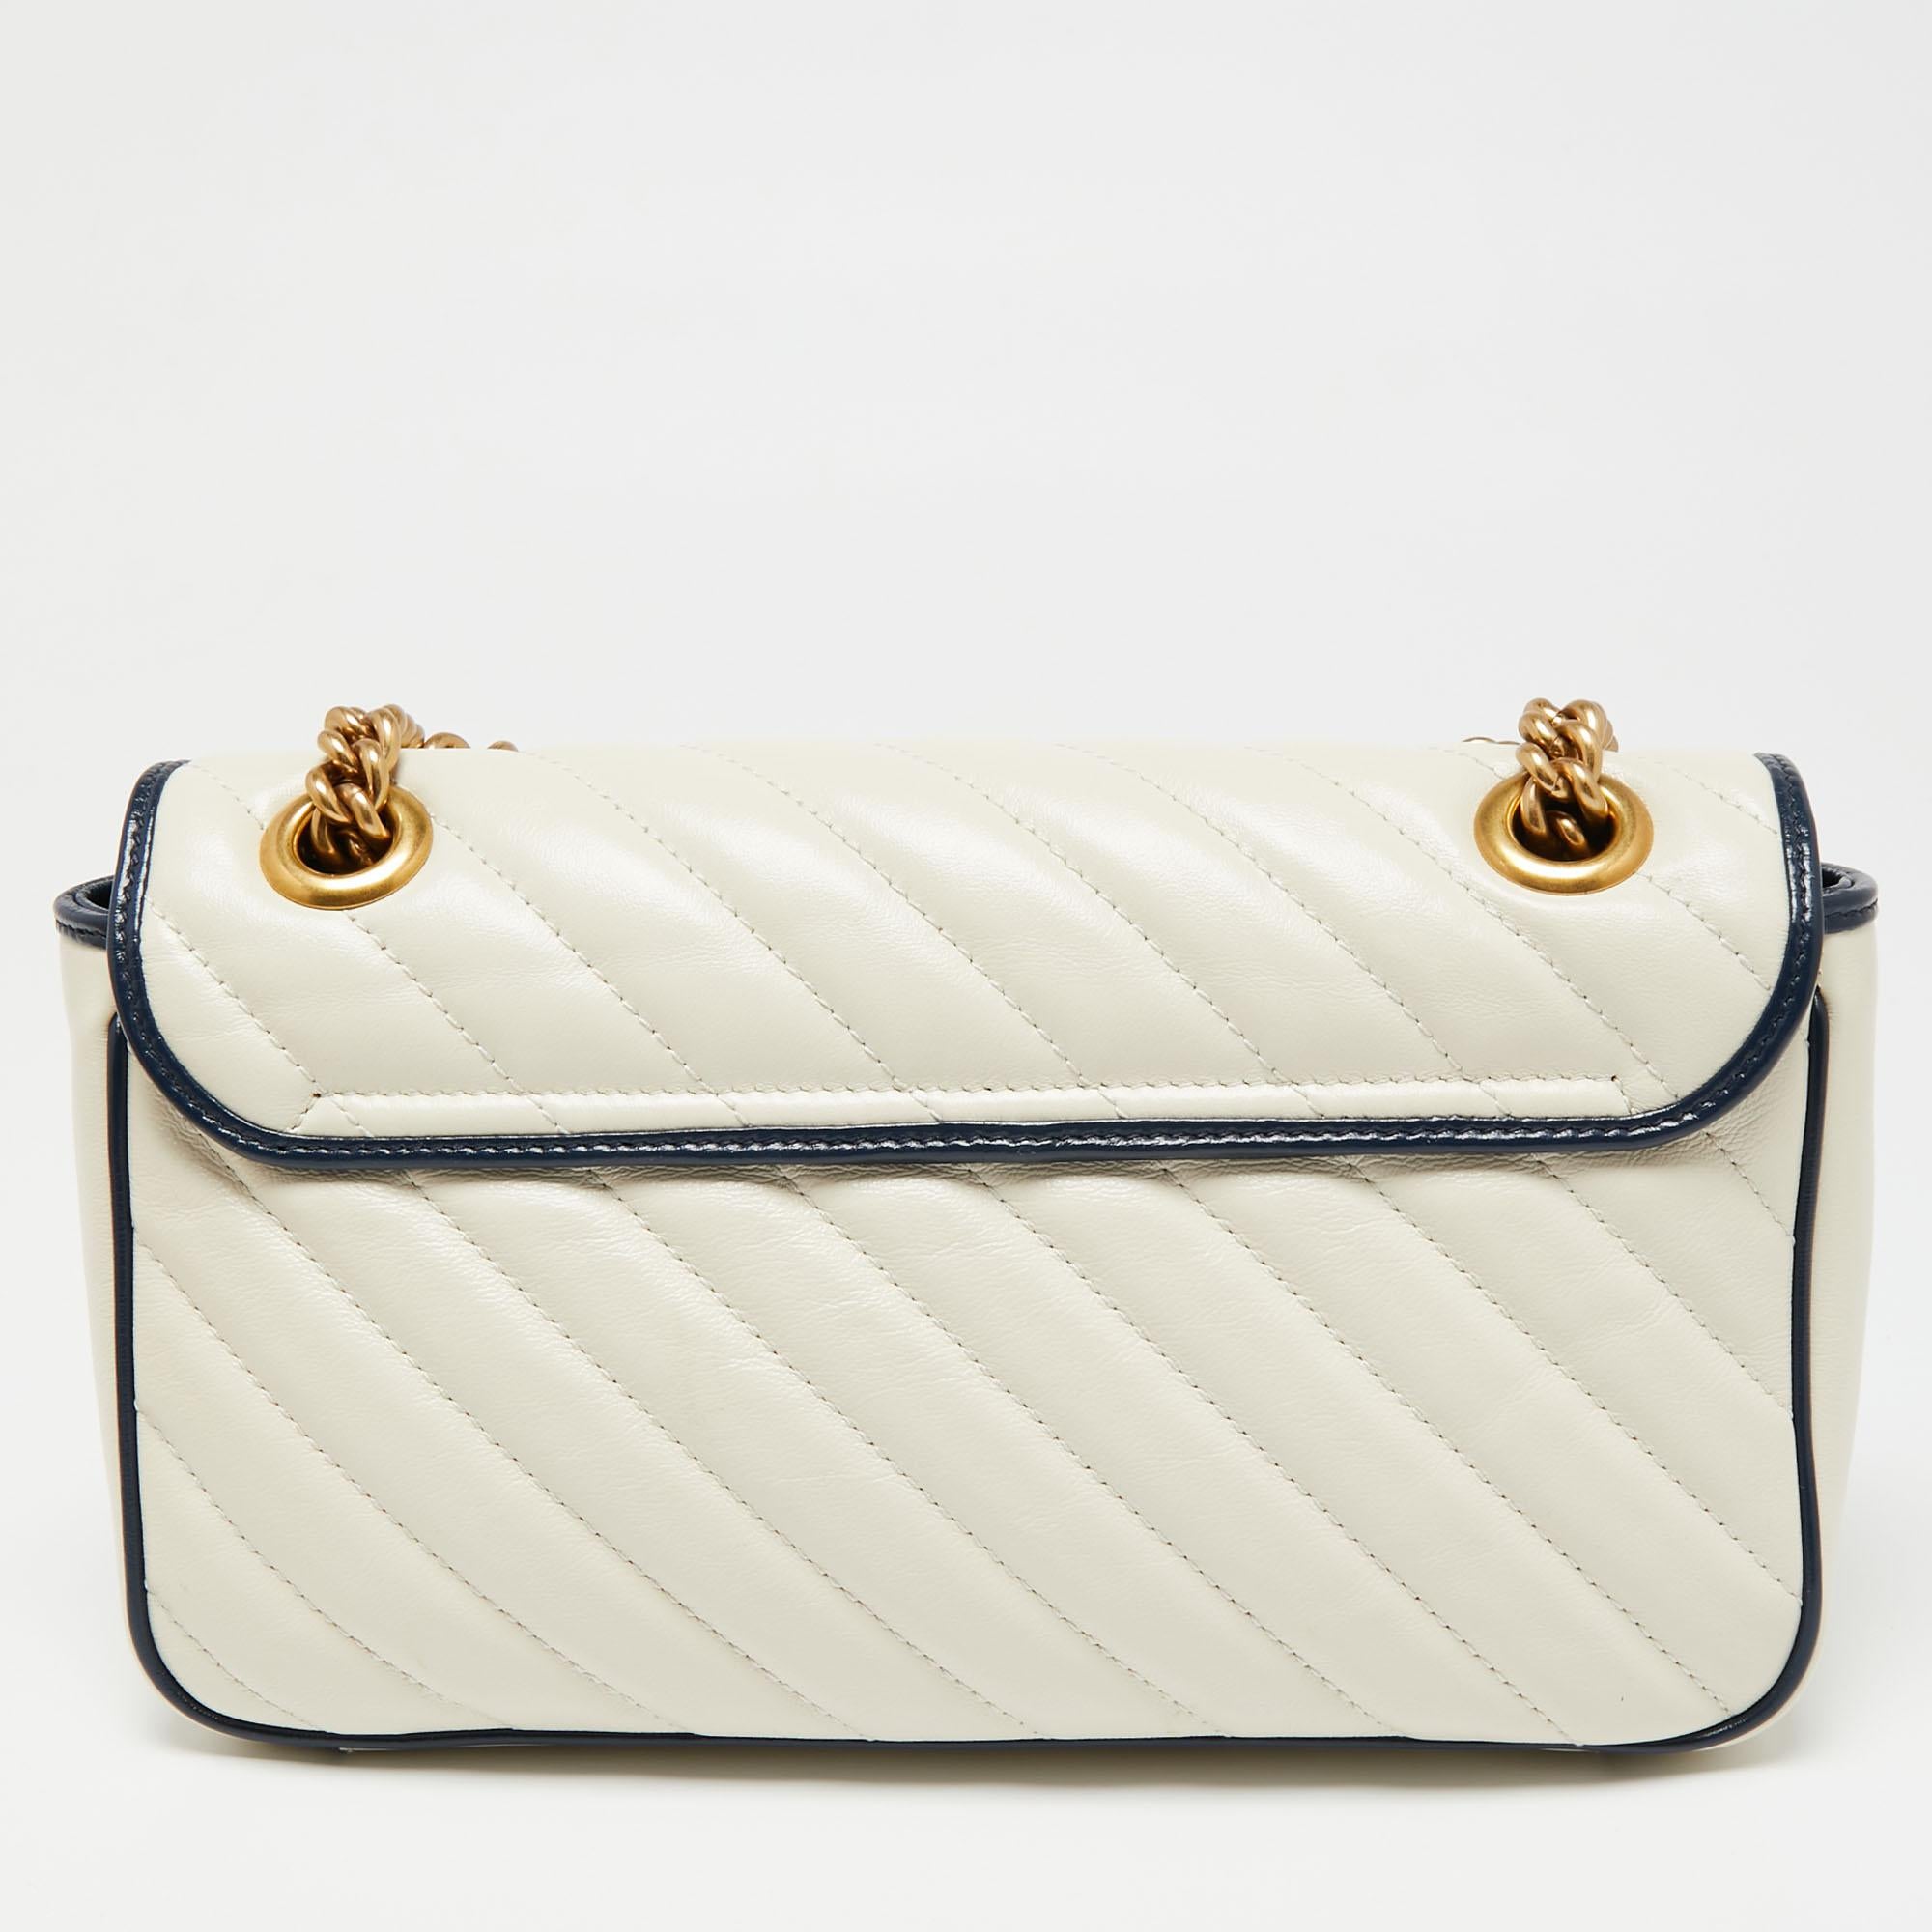 From one of the most exemplary collections of the brand, this GG Marmont Torchon bag from Gucci will deliver unending charm and aesthetics to your style. It has been crafted using blue-white Matelasse leather, with a GG motif embellishing the front.